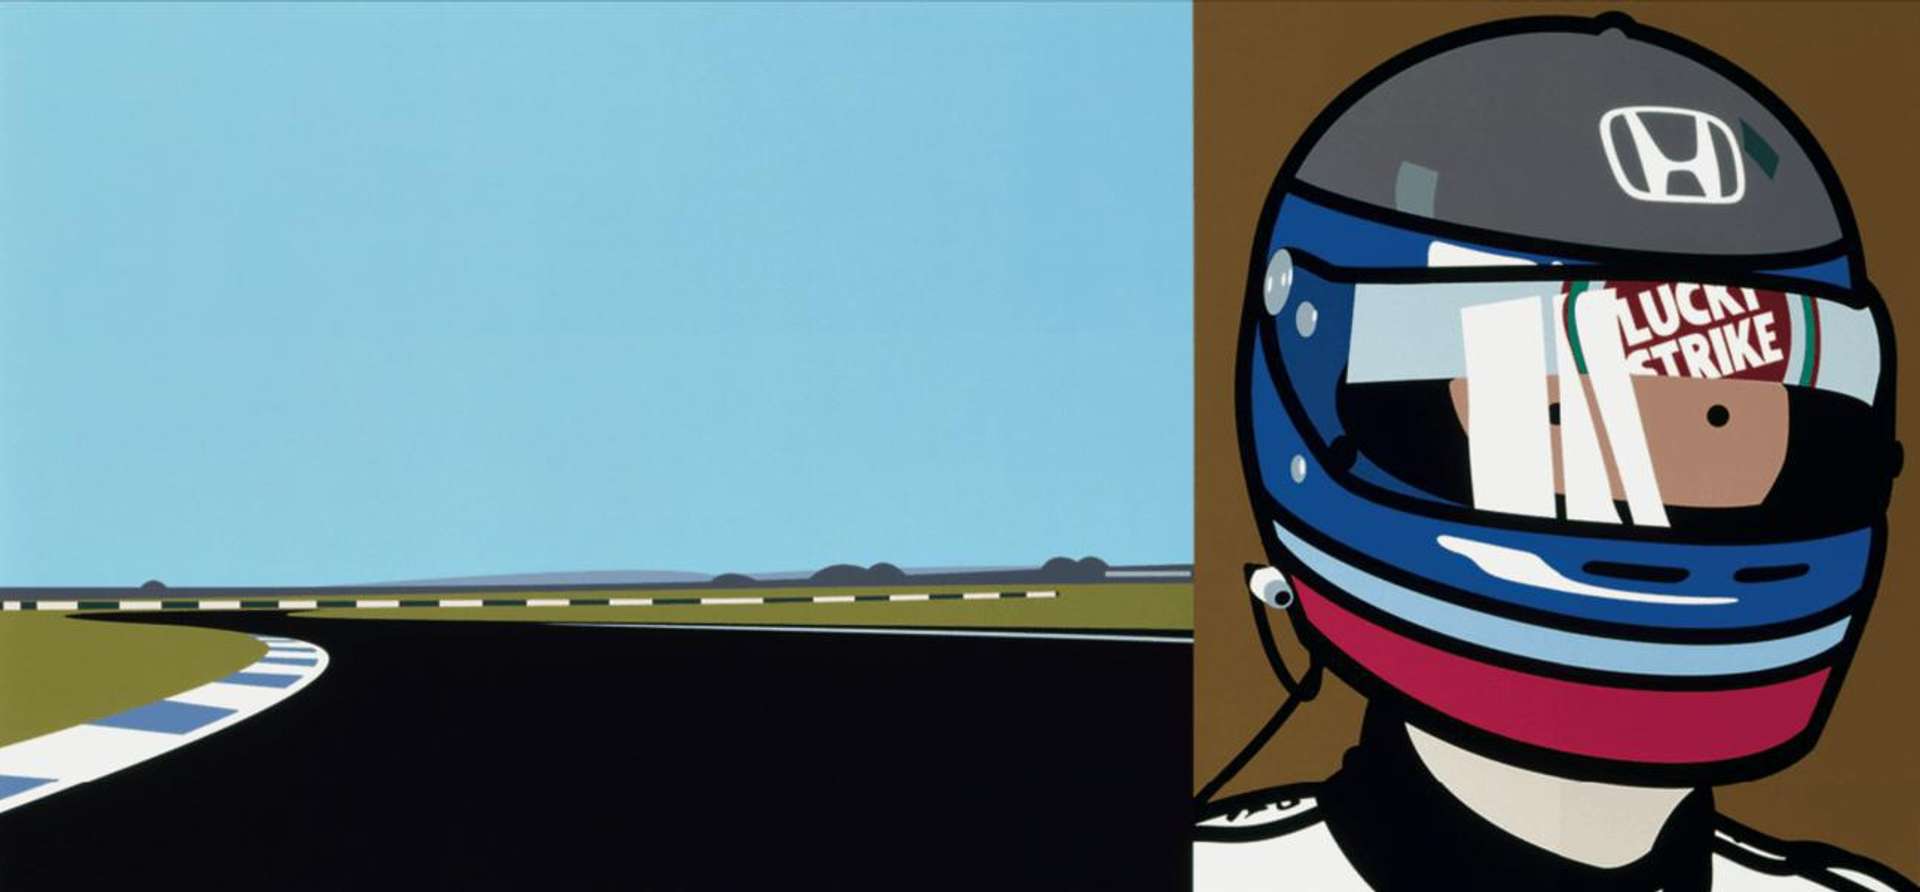 Imagine You Are Driving (Fast)/Rio/Helmet by Julian Opie